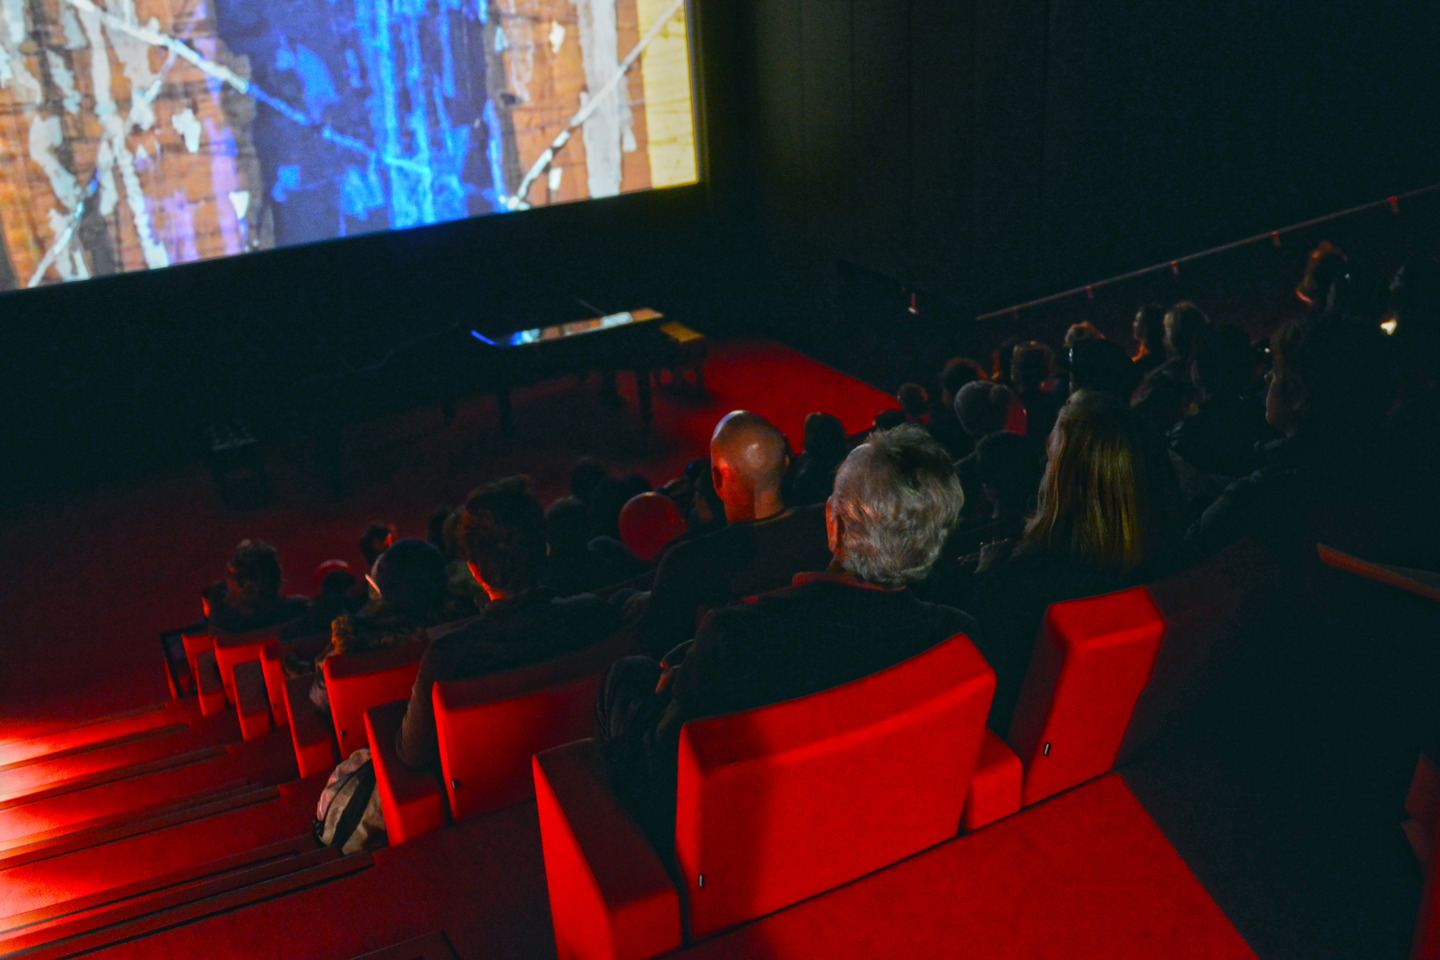 Visitors watch a film screening in the darkened Len Lye Centre Cinema, which is characterised by its vibrant red seats and carpet. Photo by Pip Guthrie. 